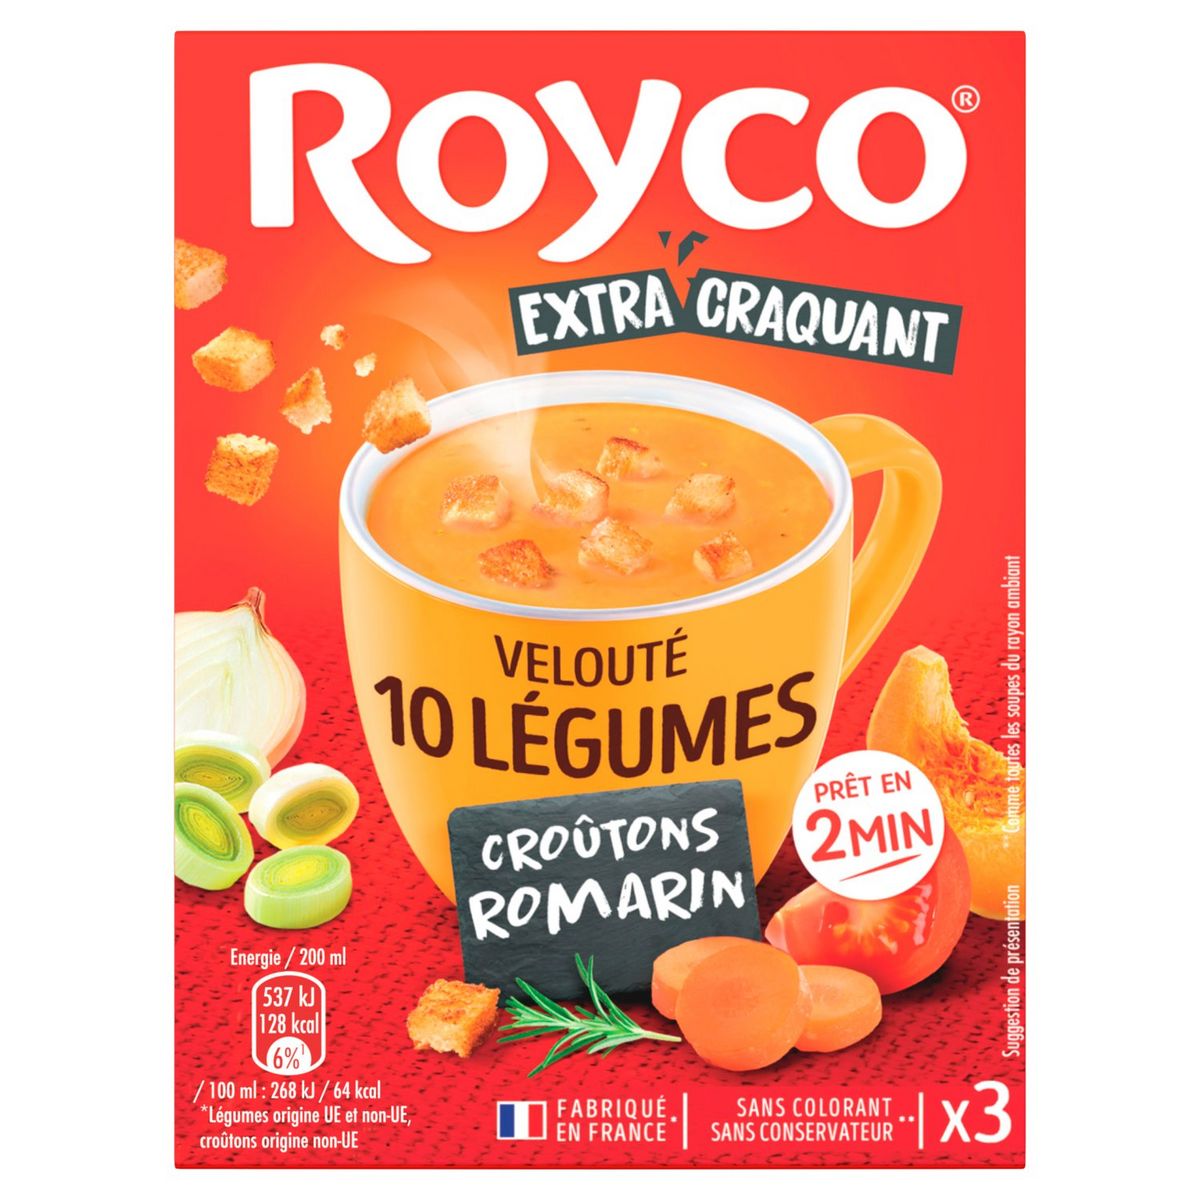 https://my-french-grocery.com/wp-content/uploads/2022/05/ROYCO-Instant-veloute-soup-with-10-vegetables-with-rosemary-croutons.jpeg